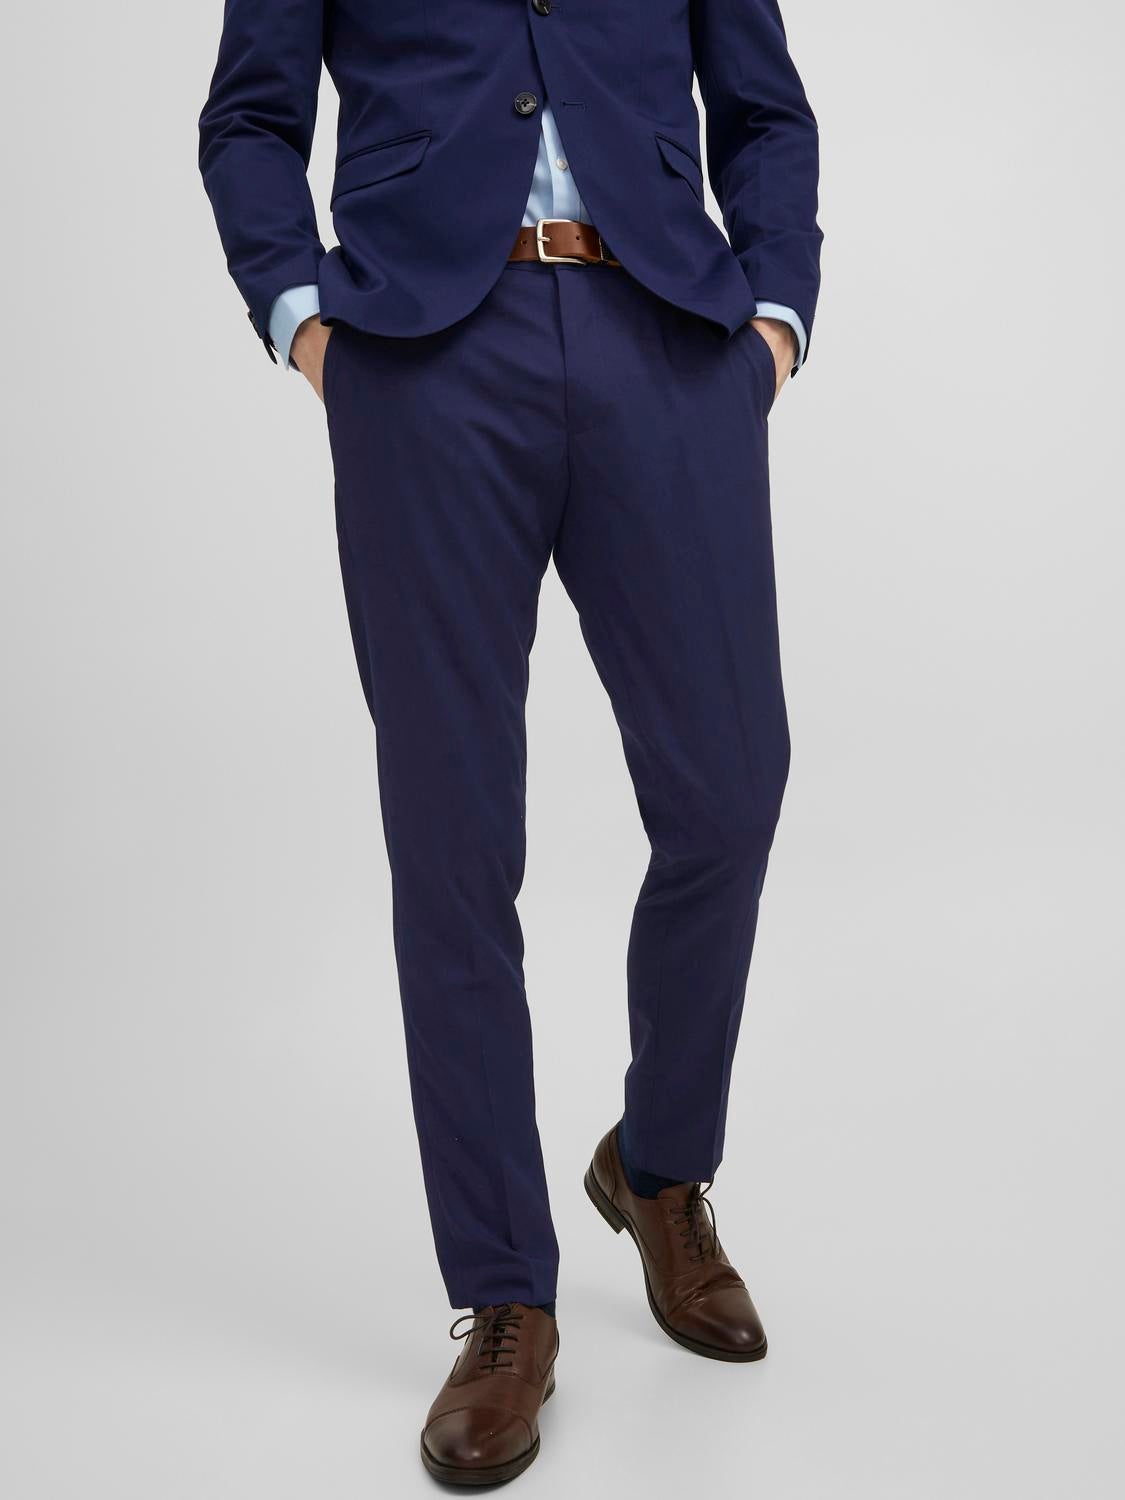 Taylor & Wright Chelsea Stone Check Slim Fit Suit Trousers - Matalan